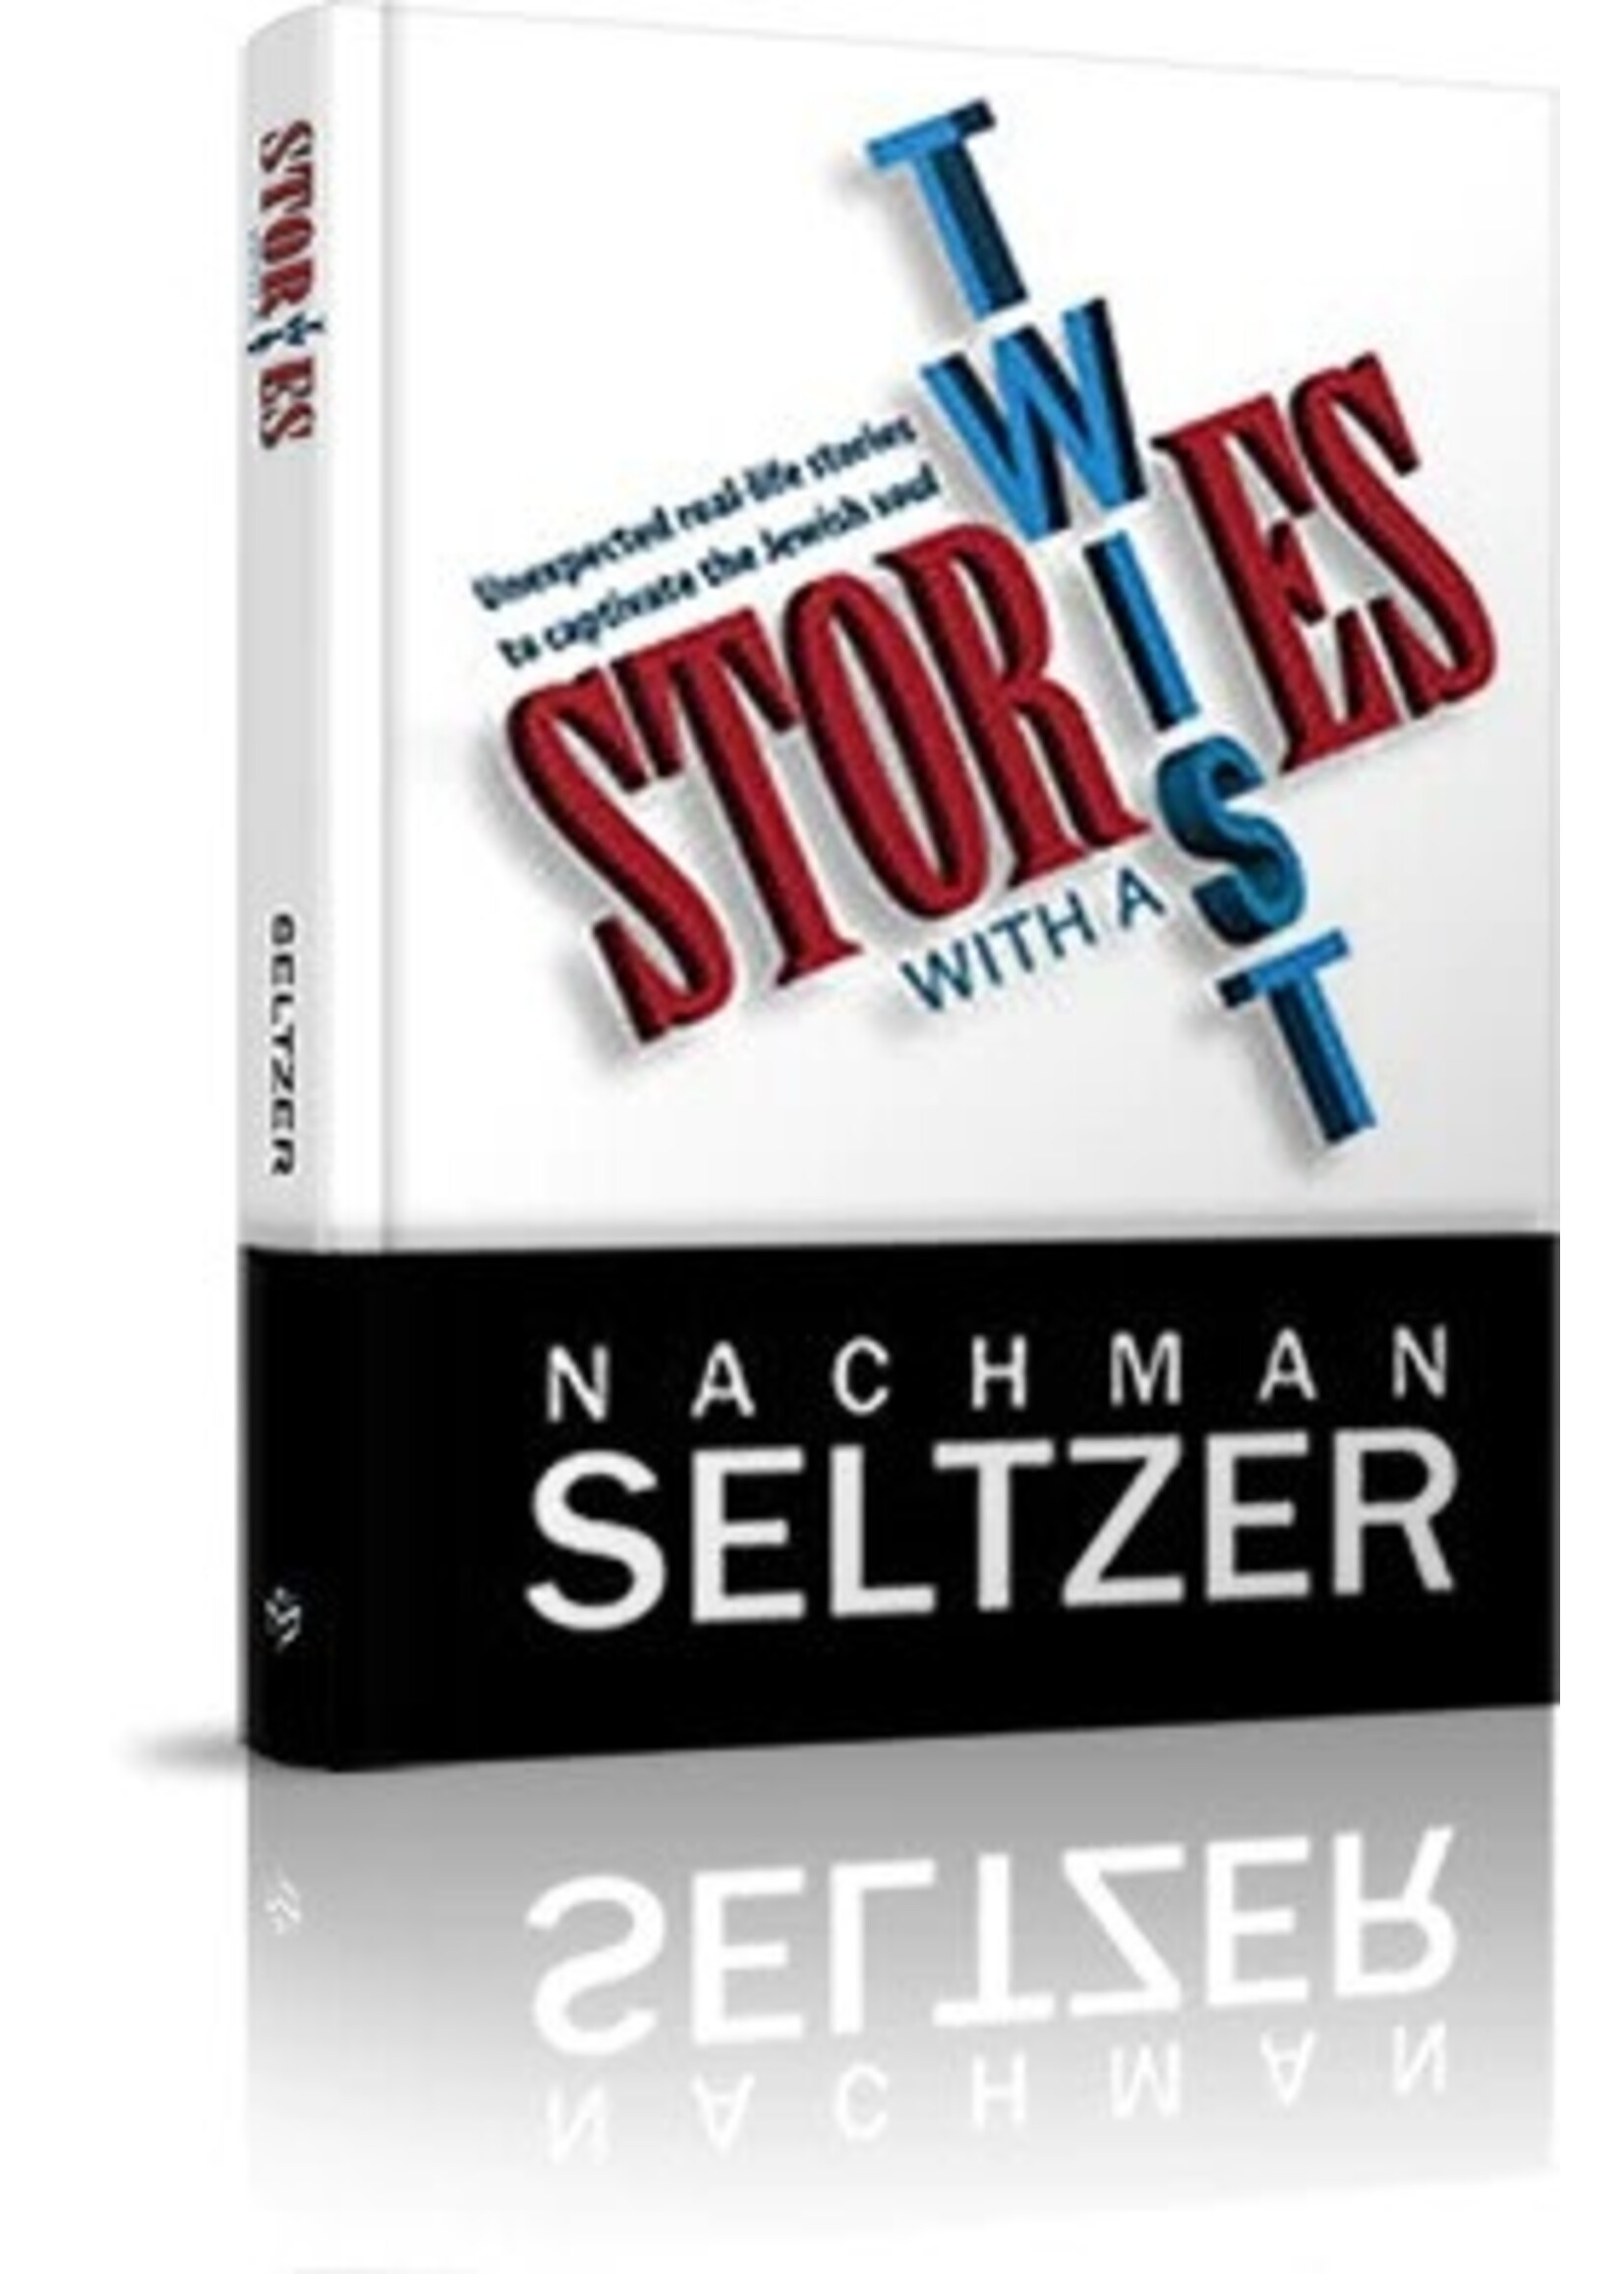 STORIES WITH A TWIST - SELTZER